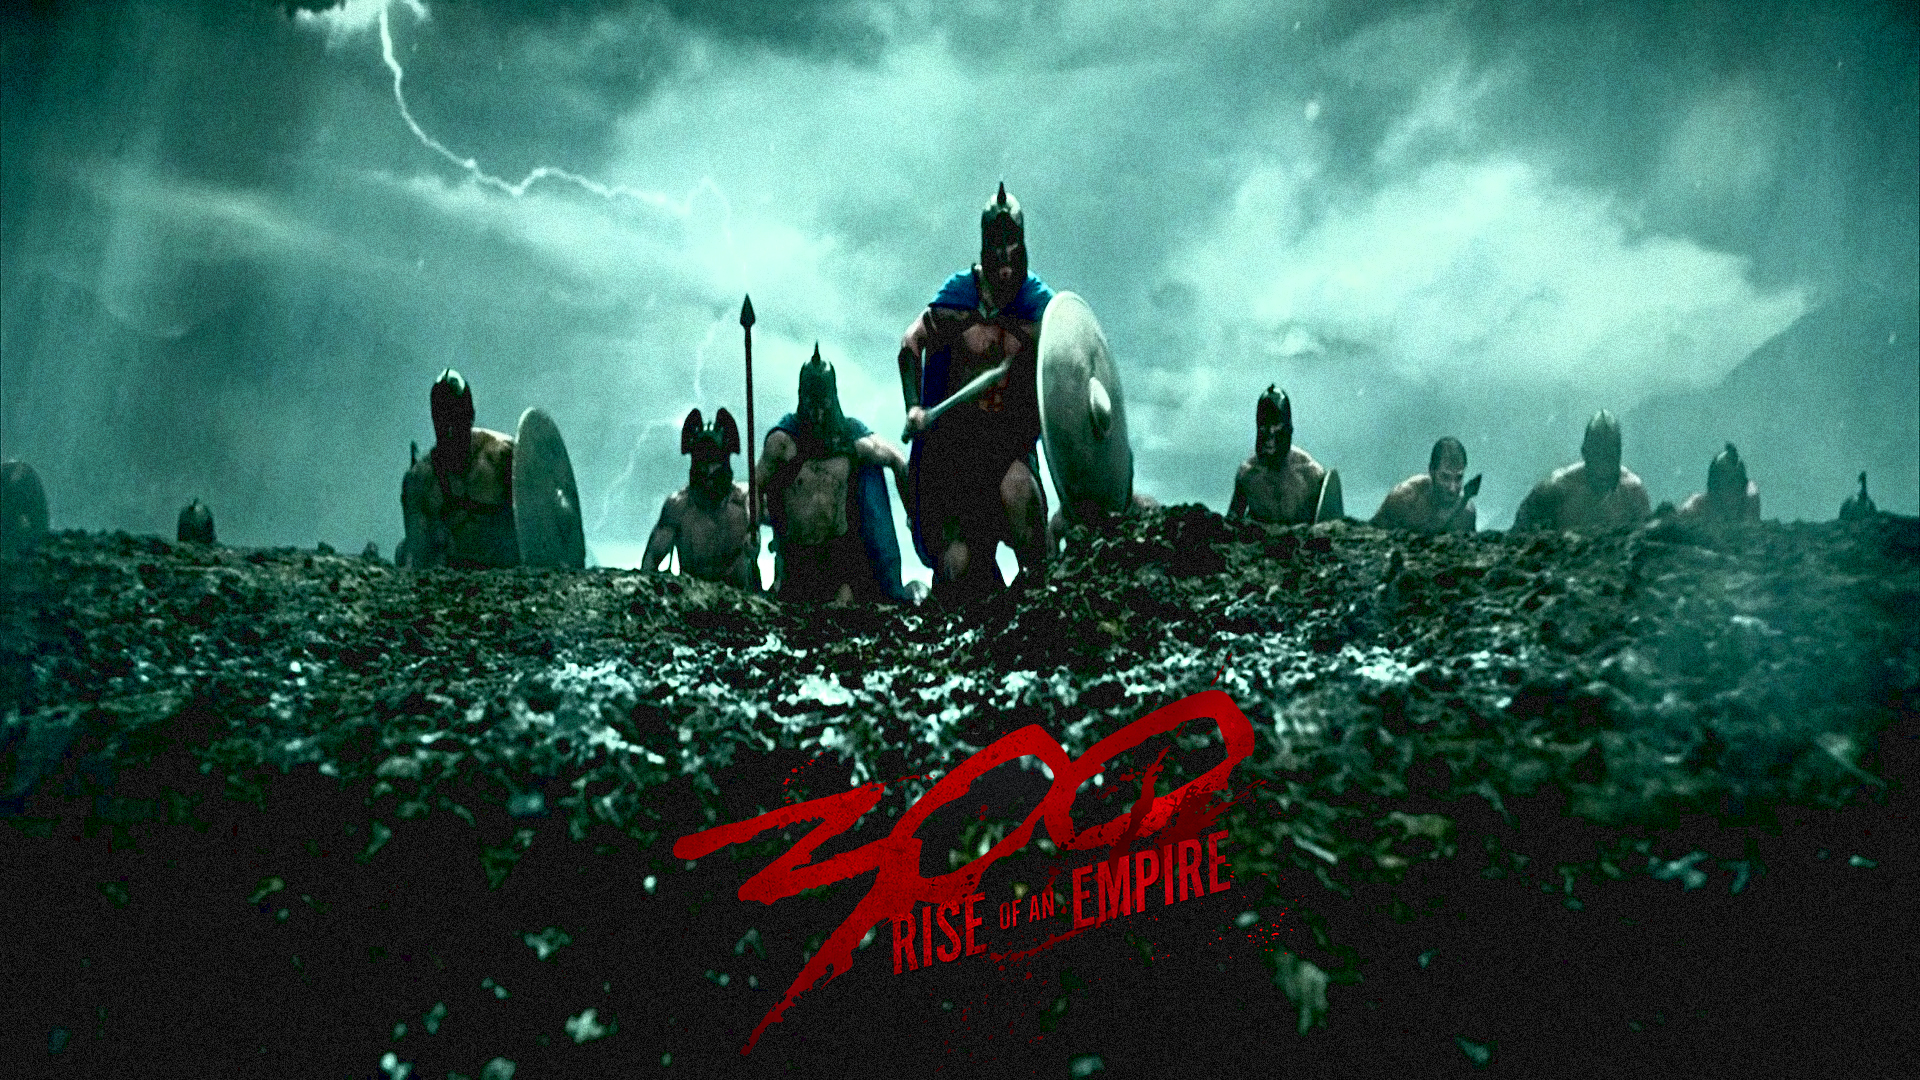 Rise Of An Empire HD Wallpaper Pictures